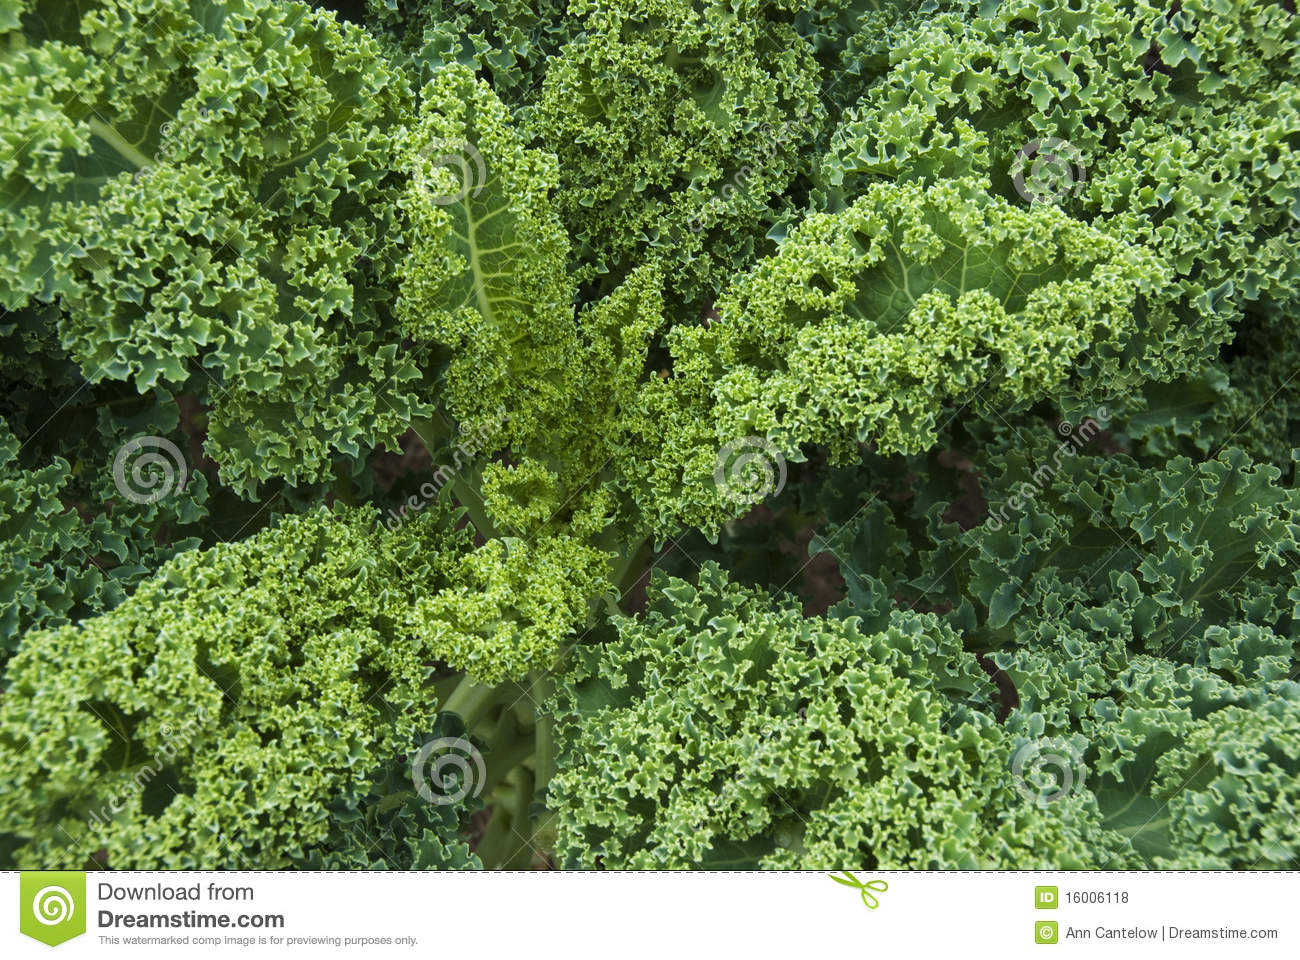 Kale Plant Top In A Community Garden Looking Down Towards The Center